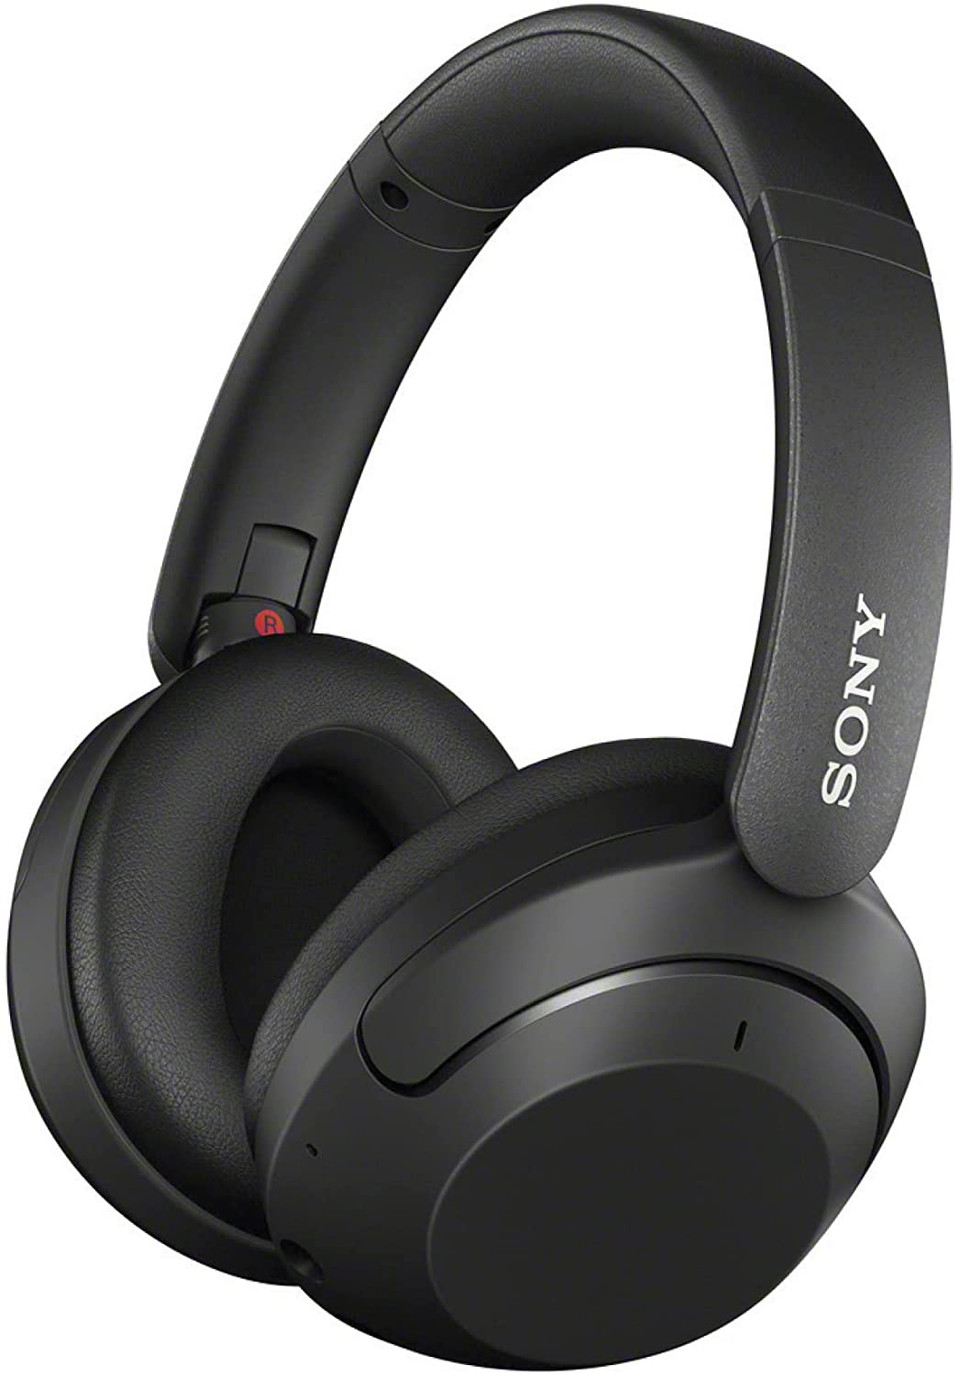 Sony Wireless Noise Cancelling Headphones (Refurbished): WH-XB910N $80, Sony WH-1000XM5 $184 & More + Free Shipping